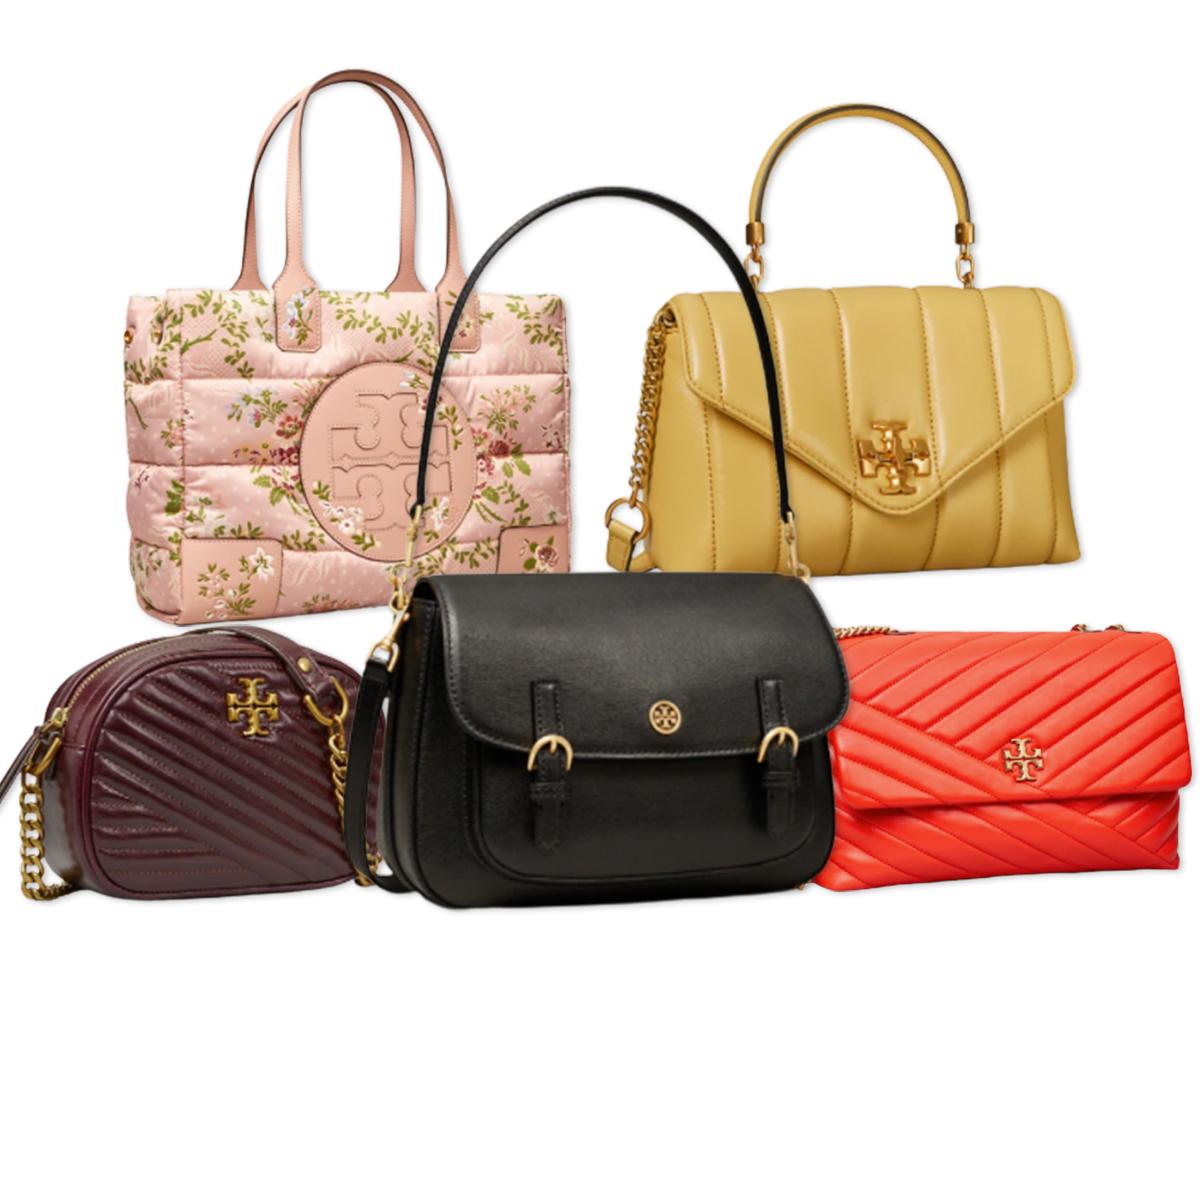 Get up to 70% off at your Tory Burch Outlet Store!! #toryburch #torybu, tory  burch outlet